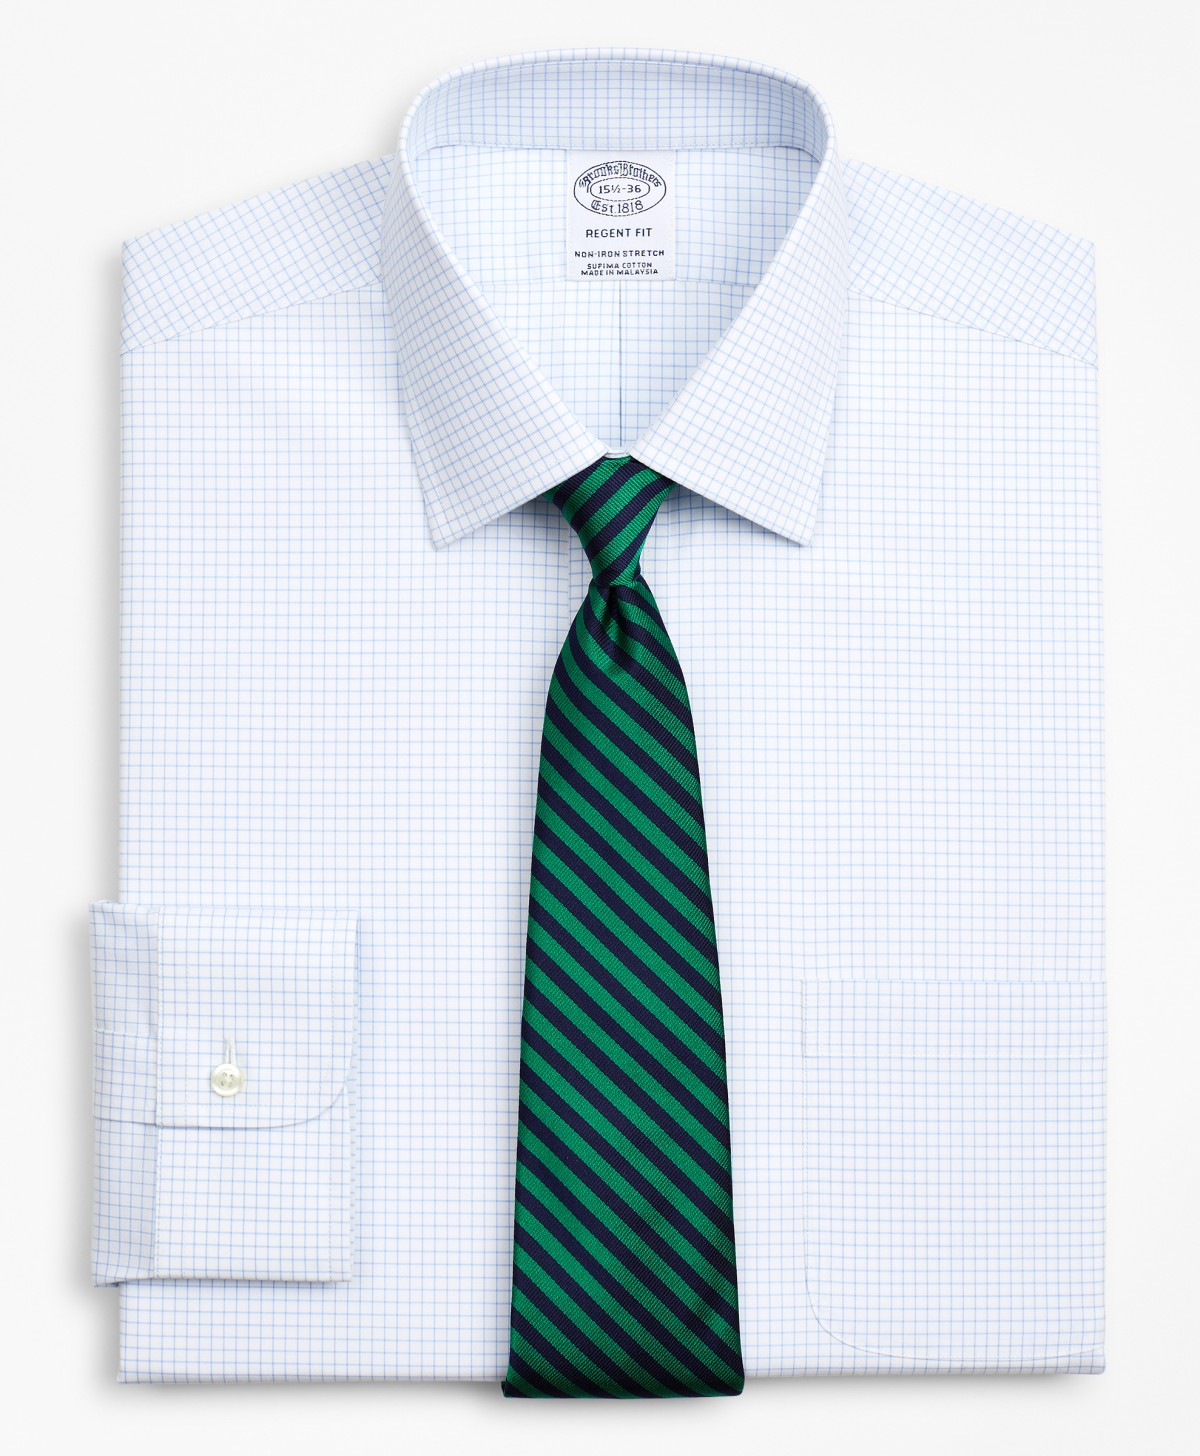 Stretch Regent Fitted Dress Shirt, Non-Iron Poplin Ainsley Collar Small Grid Check